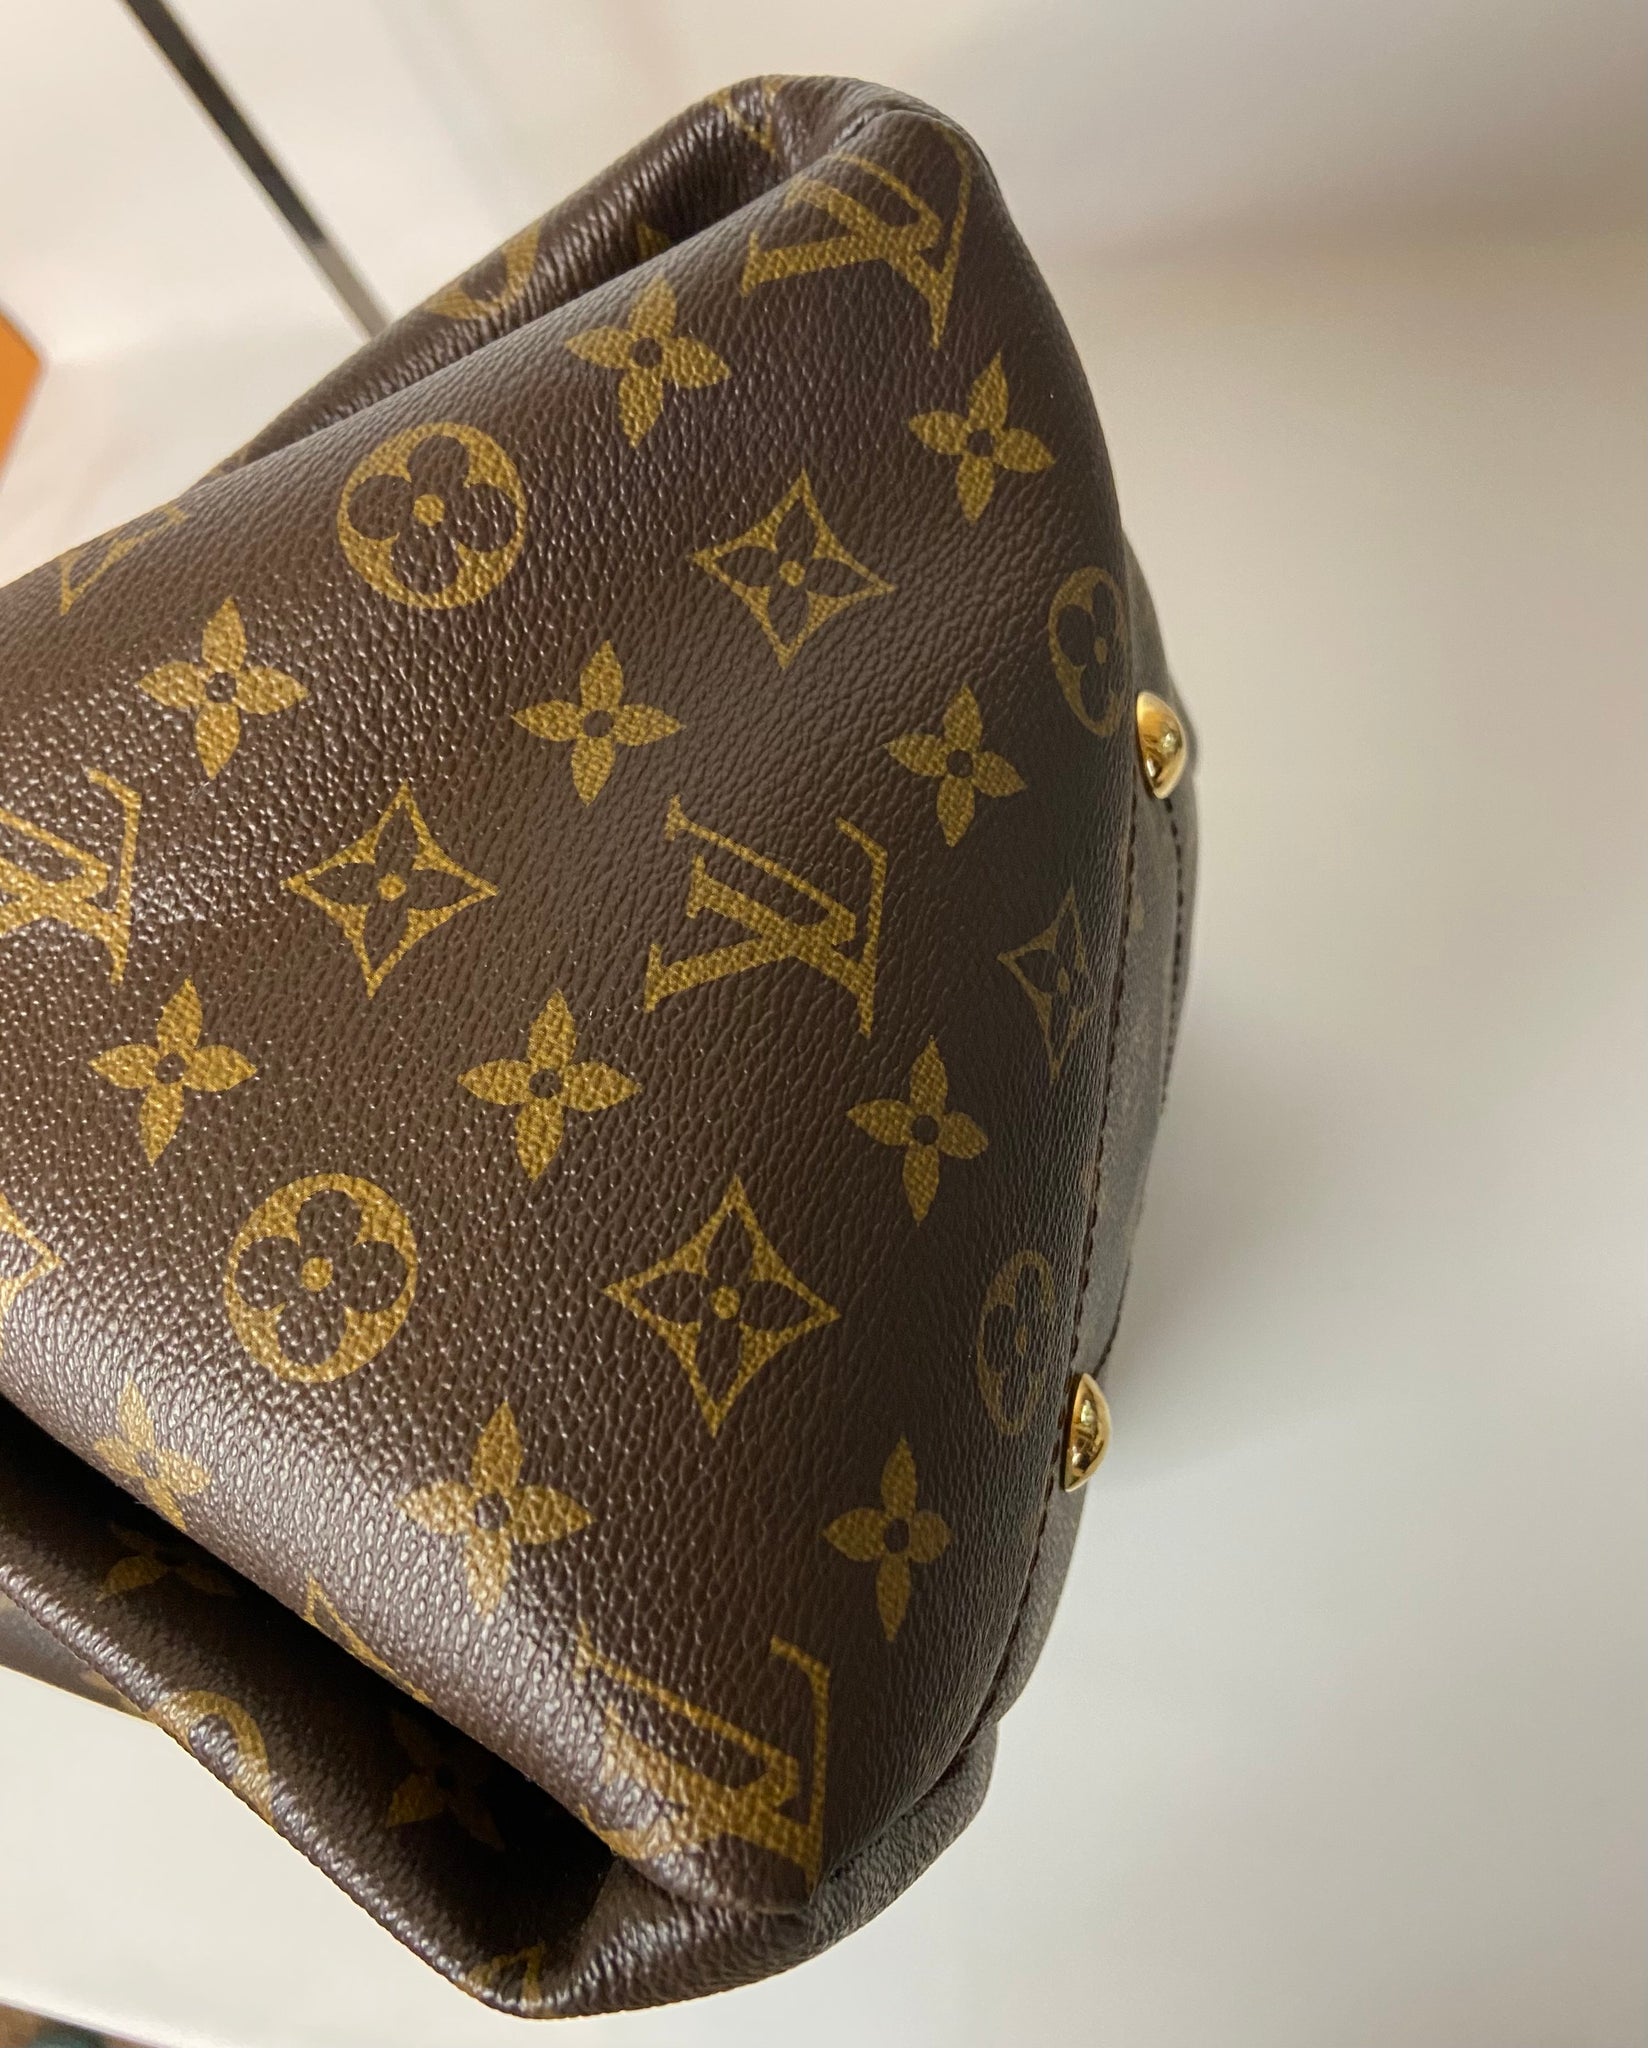 Louis Vuitton Artsy vs Neverfull: Which to Buy?